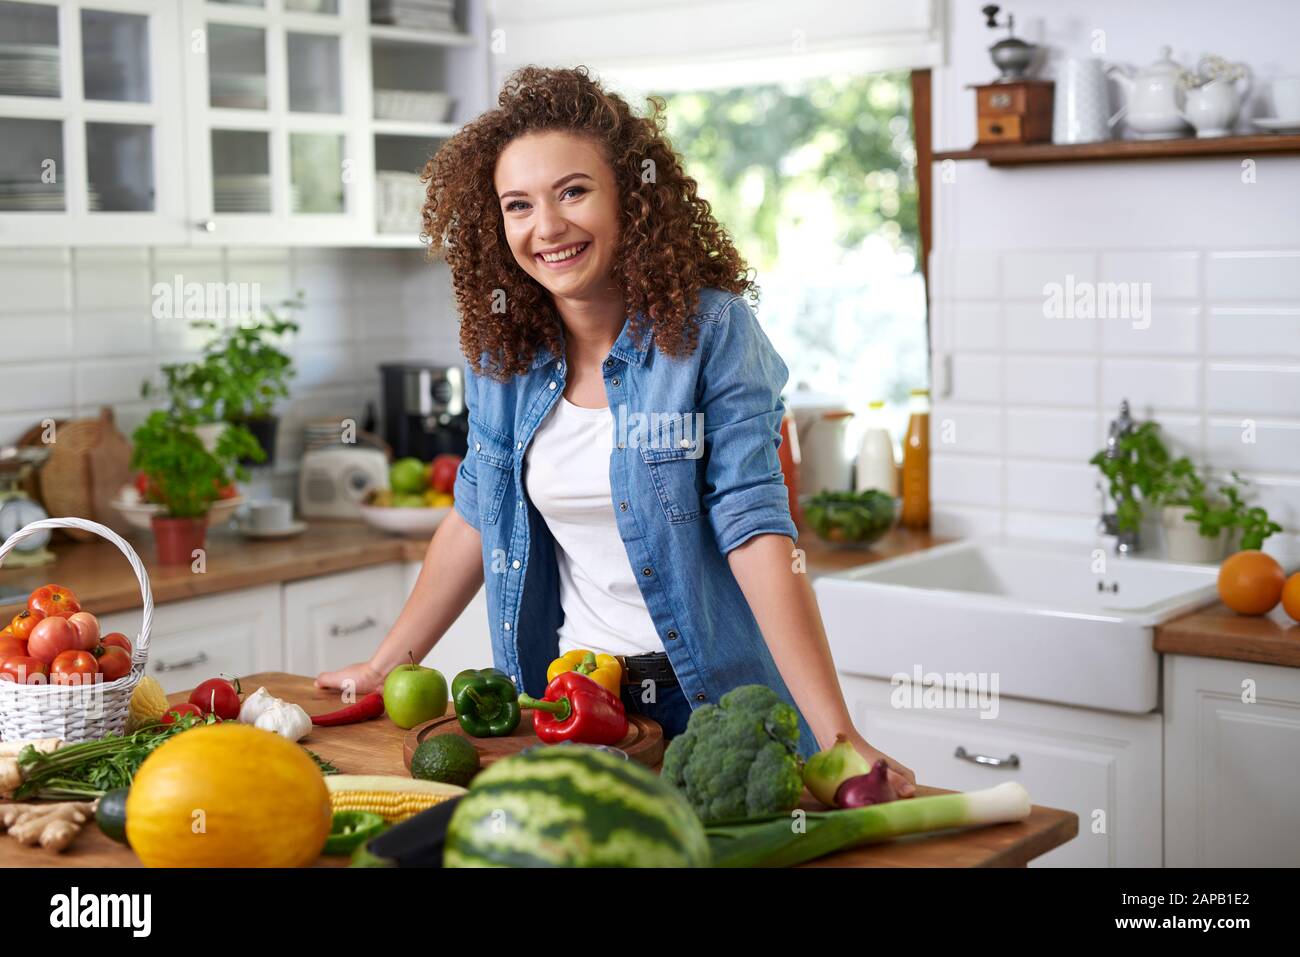 Portrait of smiling young woman in domestic kitchen Stock Photo